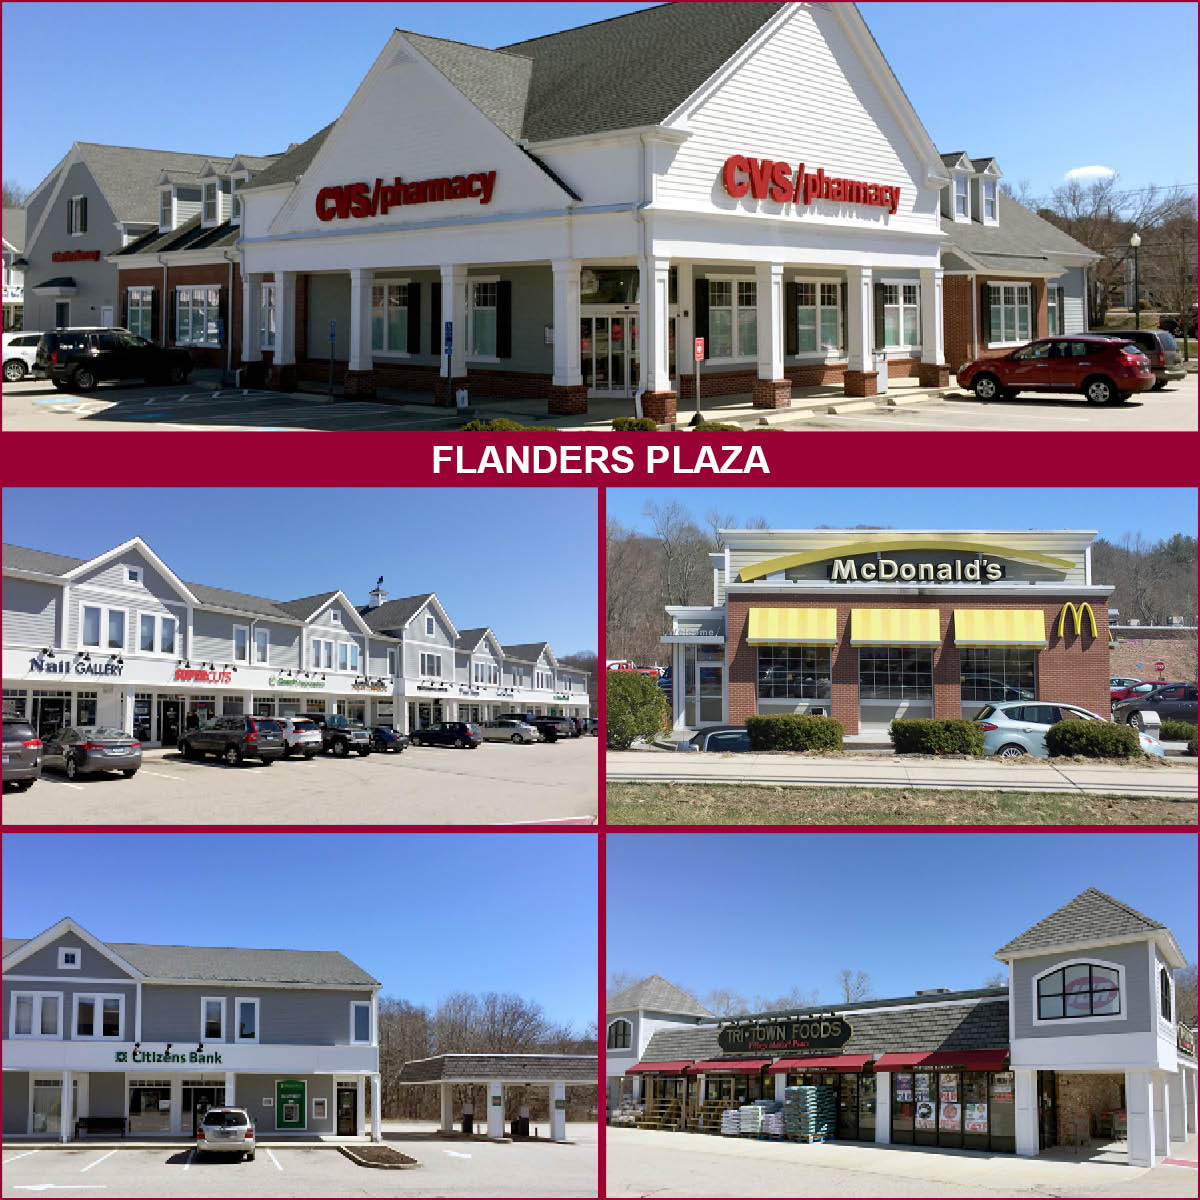 O,R&L Commercial sells Regional Shopping Center In East Lyme, CT for $15,500,000